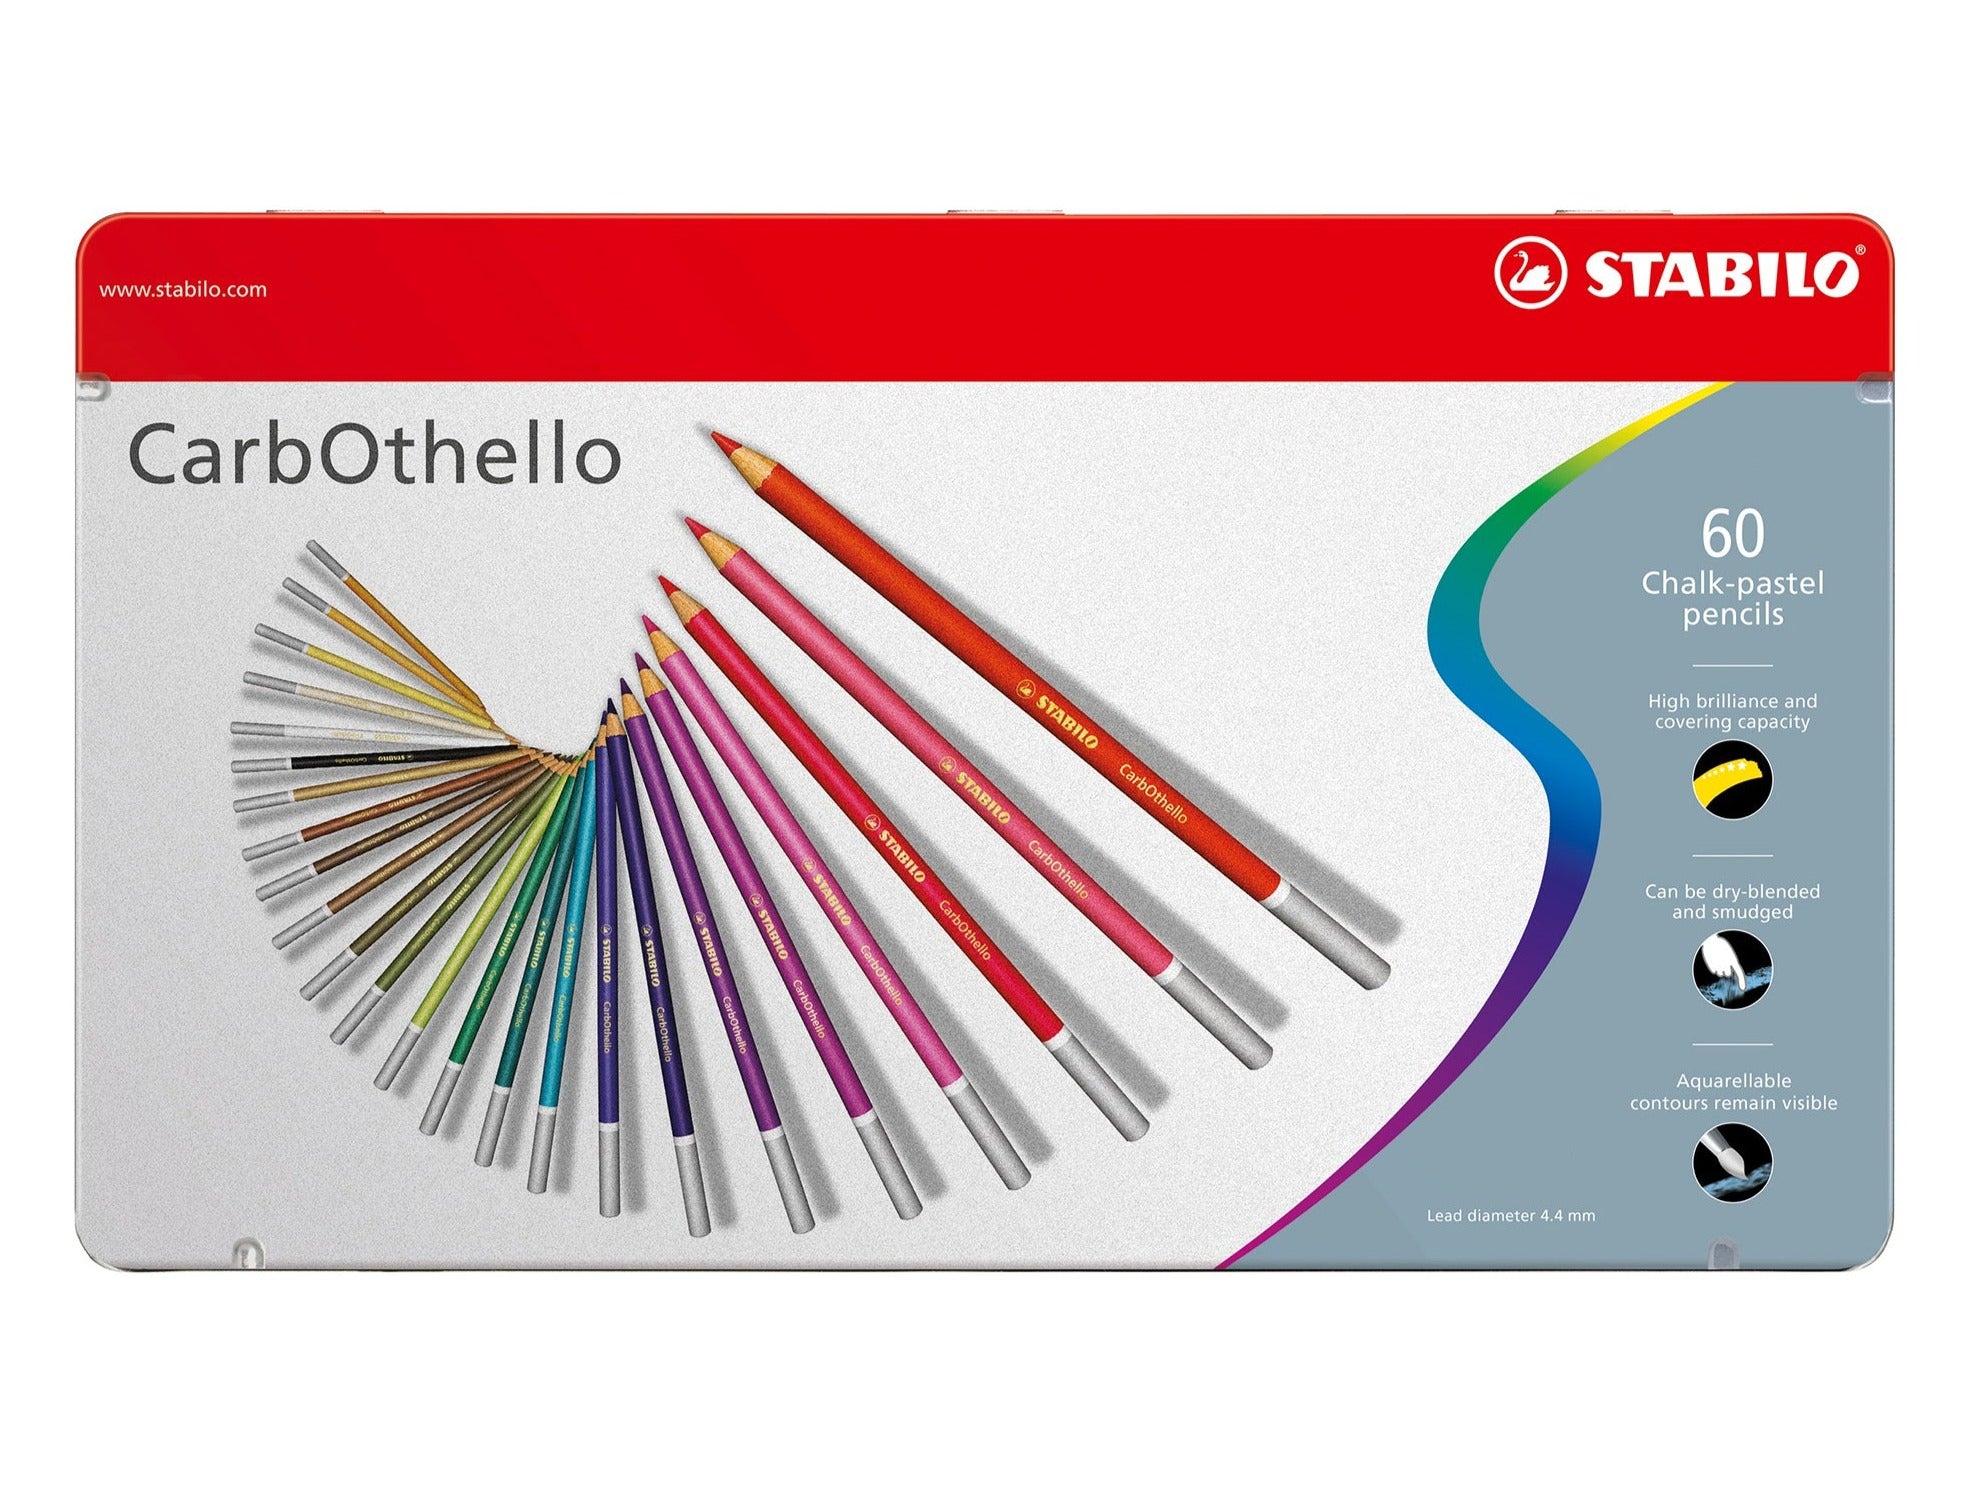 STABILO CarbOthello Chalk-Pastel Coloured Pencils are now available! - Schwan-STABILO -Most colourful Stationery Shop